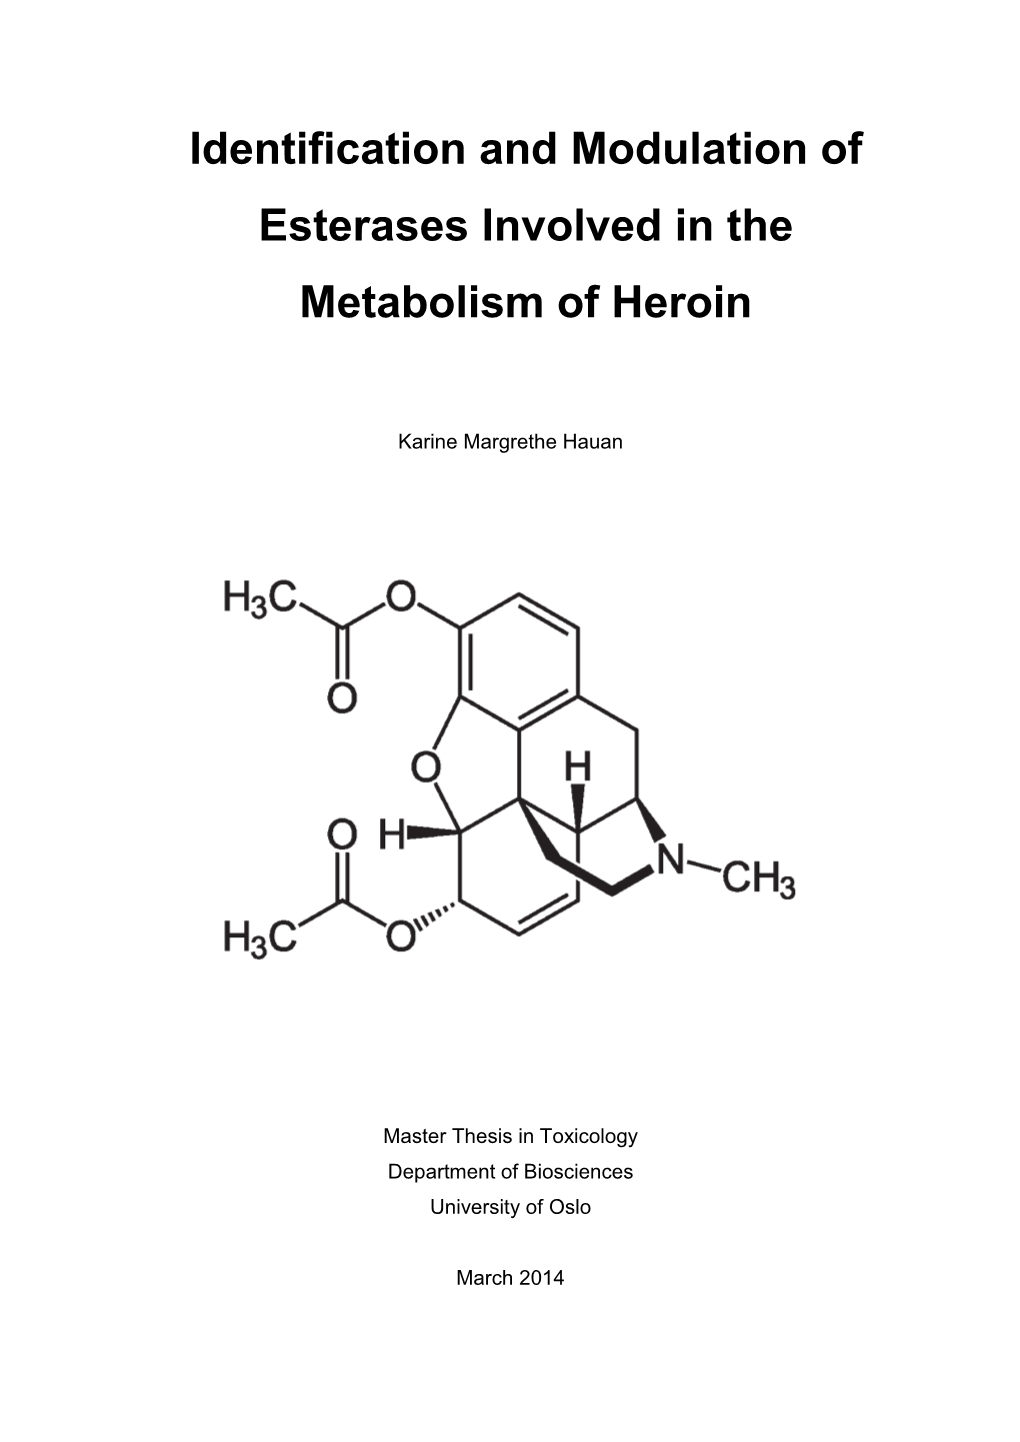 Identification and Modulation of Esterases Involved in the Metabolism of Heroin